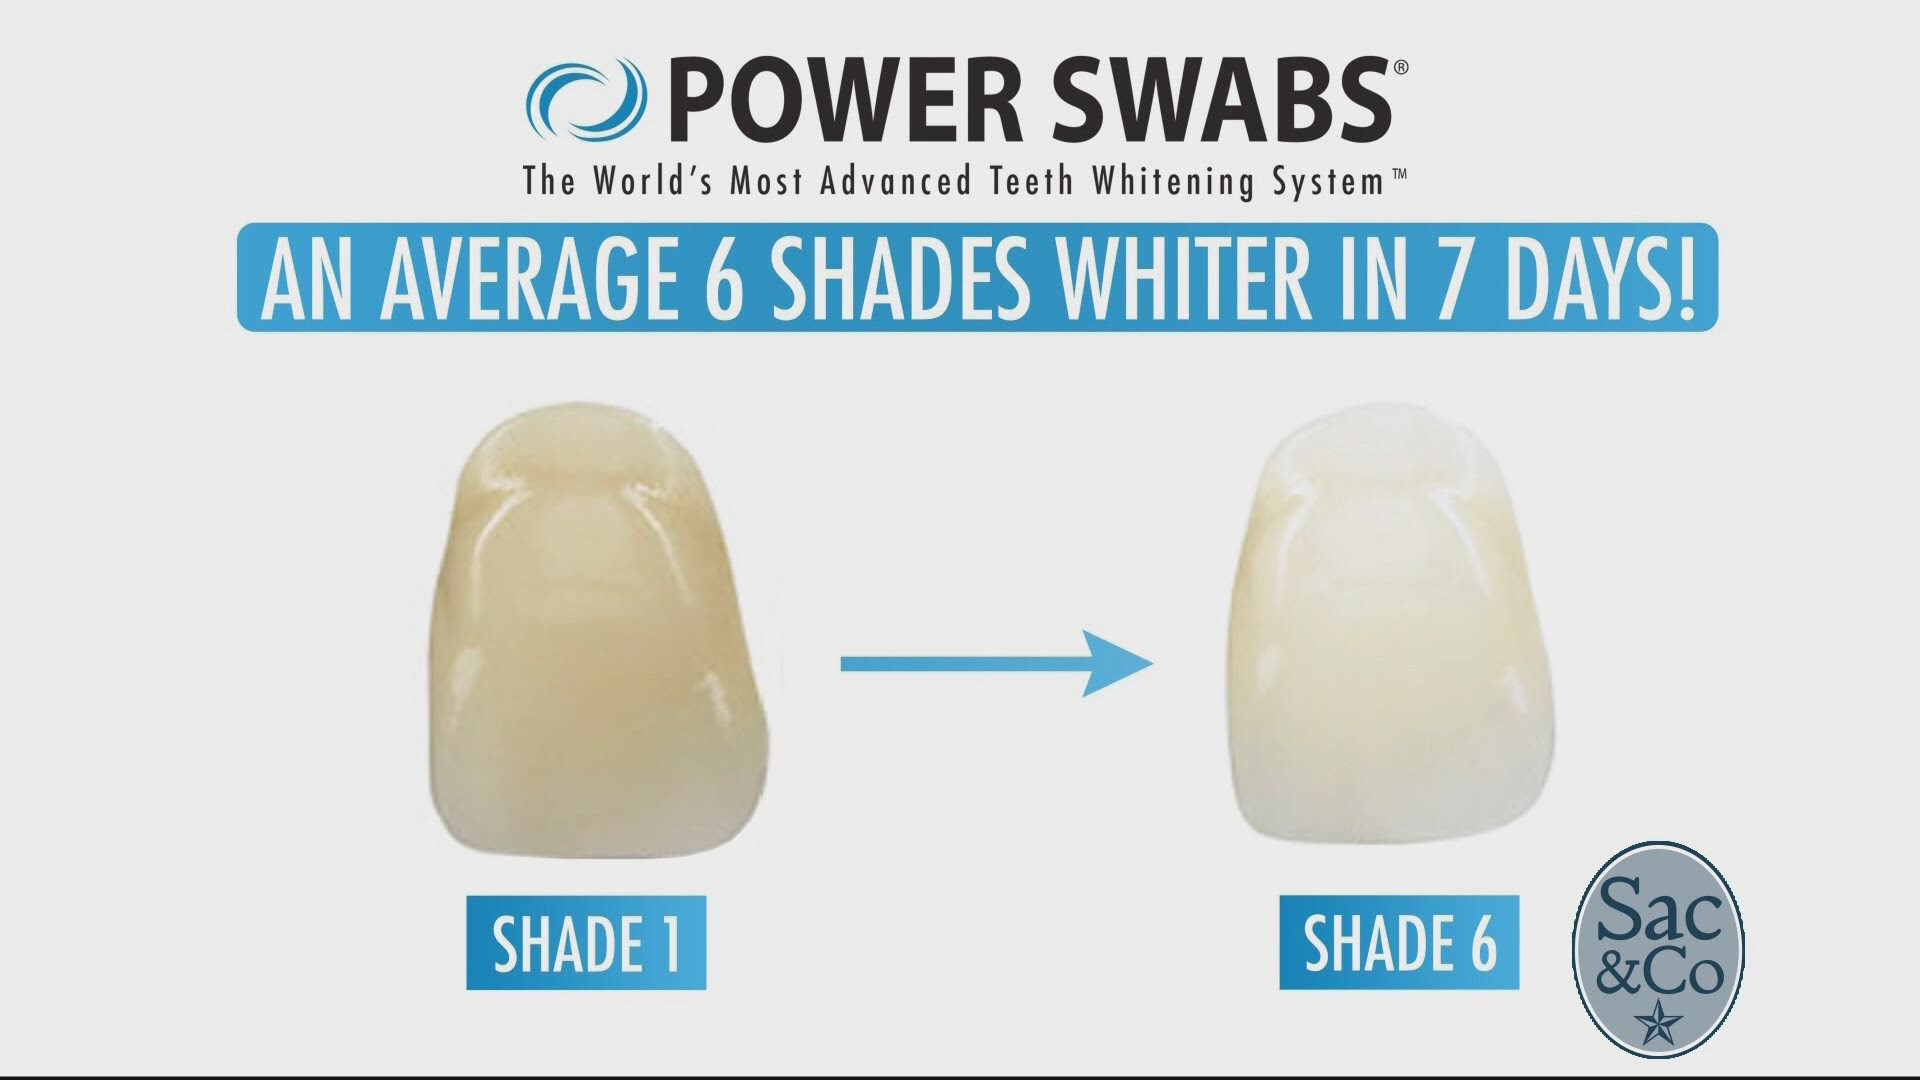 Learn how Power Swabs may be able to brighten your smile without the hassle of messy strips or trays. The following is a paid segment sponsored by True Earth Health Solutions.